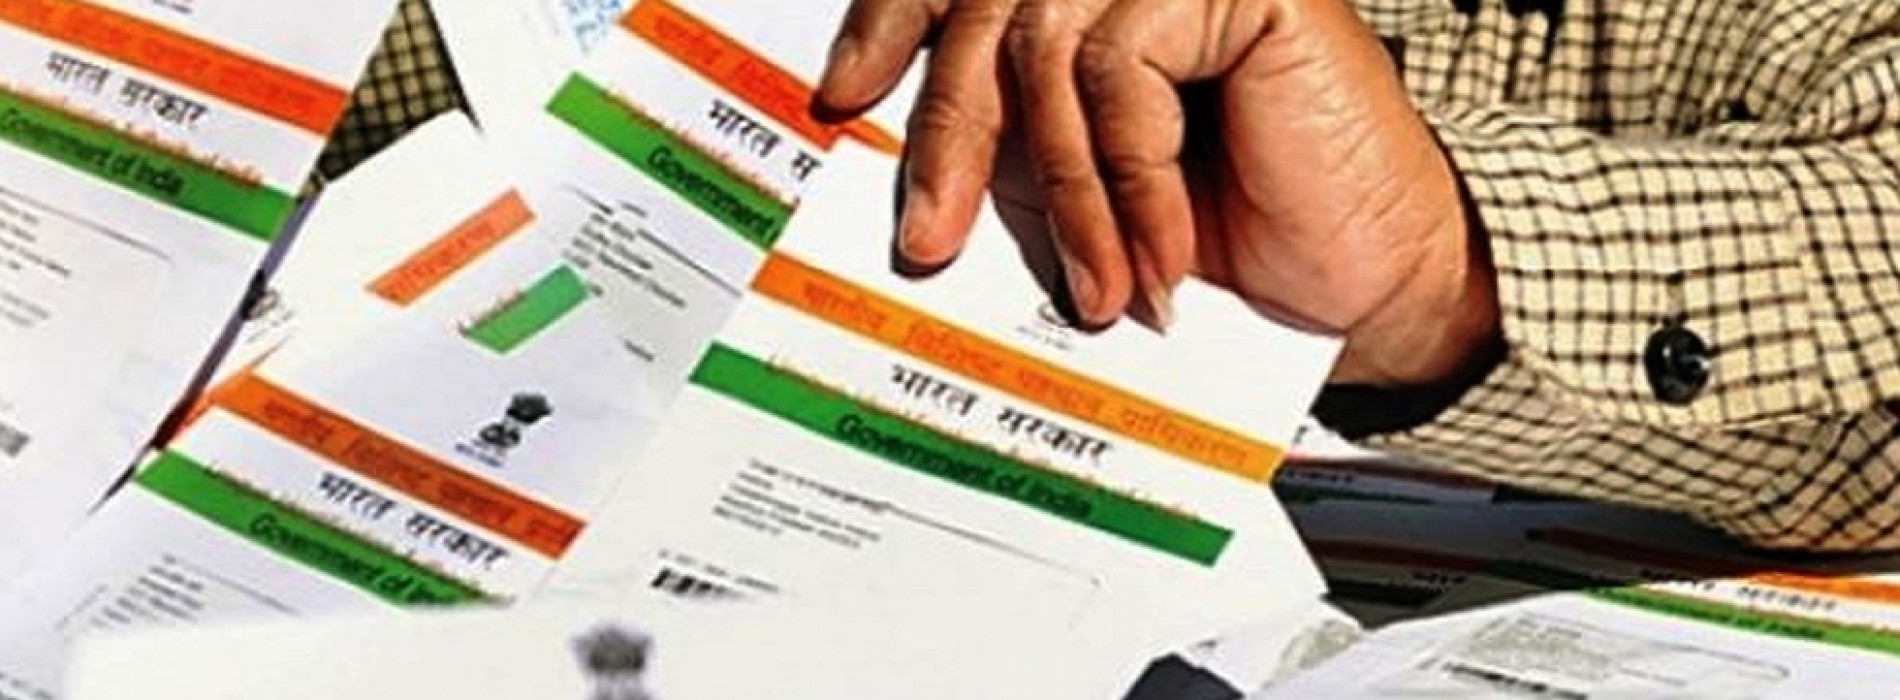 Aadhaar and other government IDs compulsory to book domestic flights soon